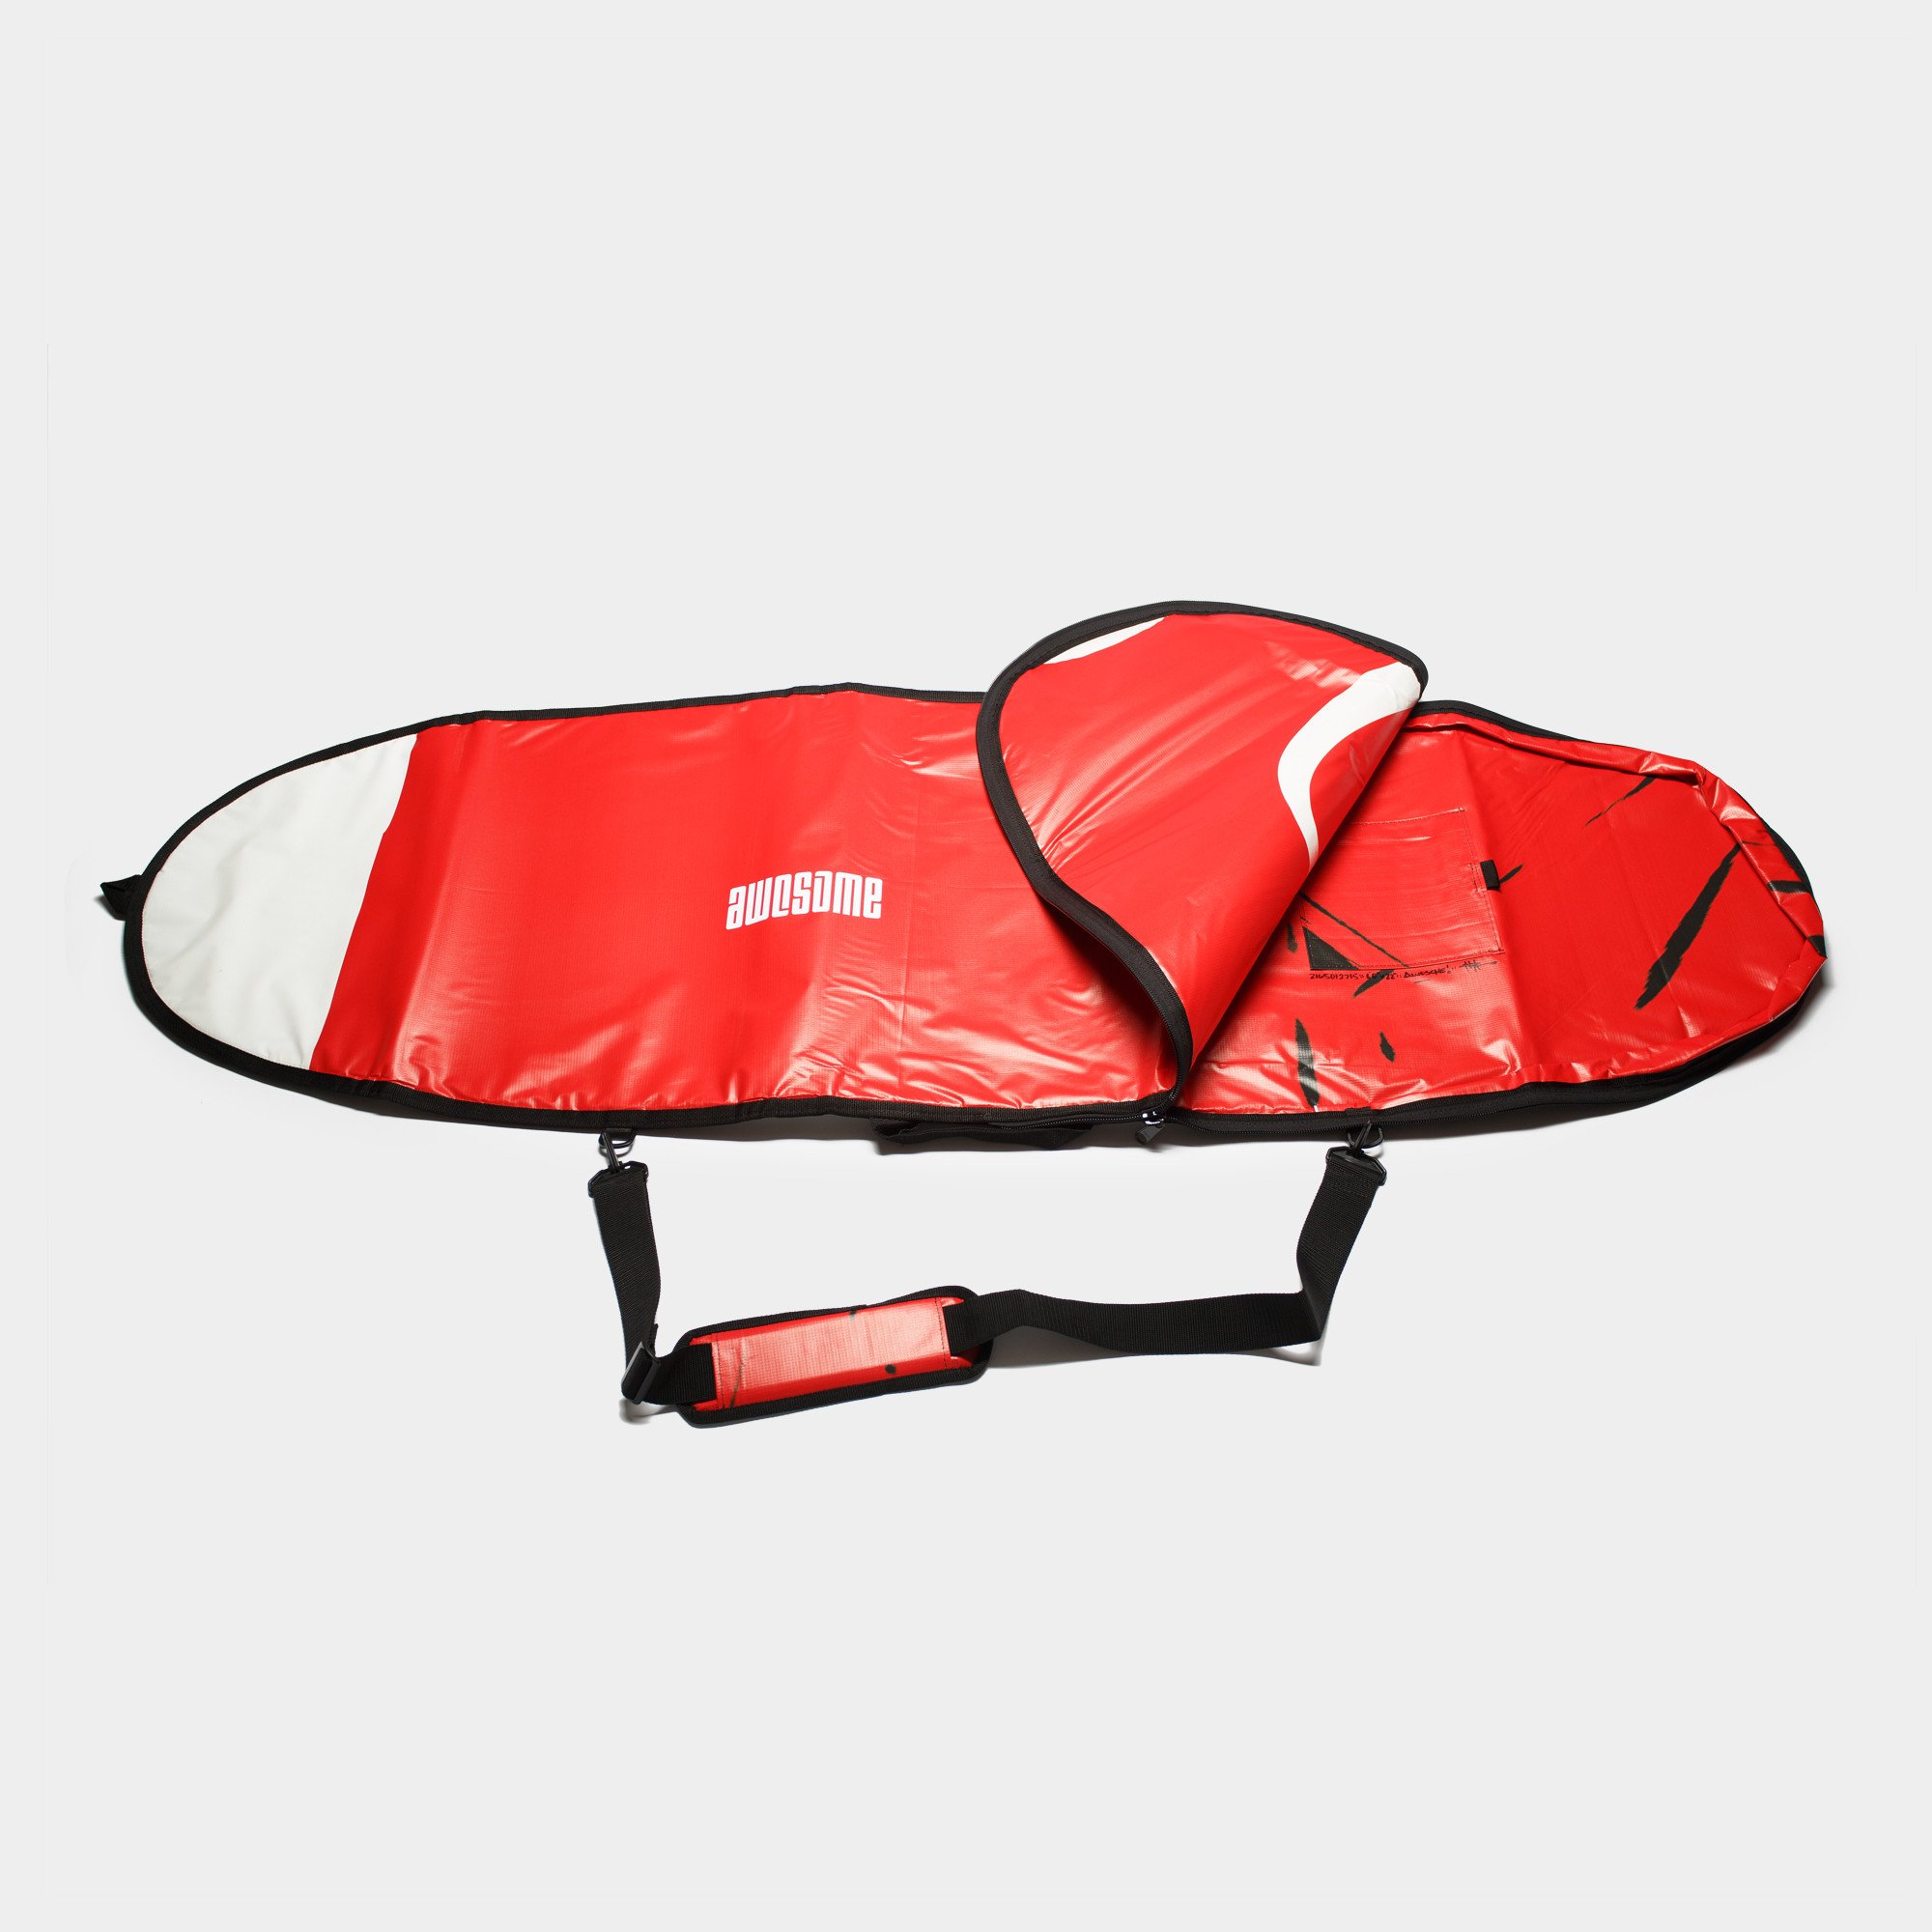 6'0 Awesome x The Progress Project Boardbag - Red